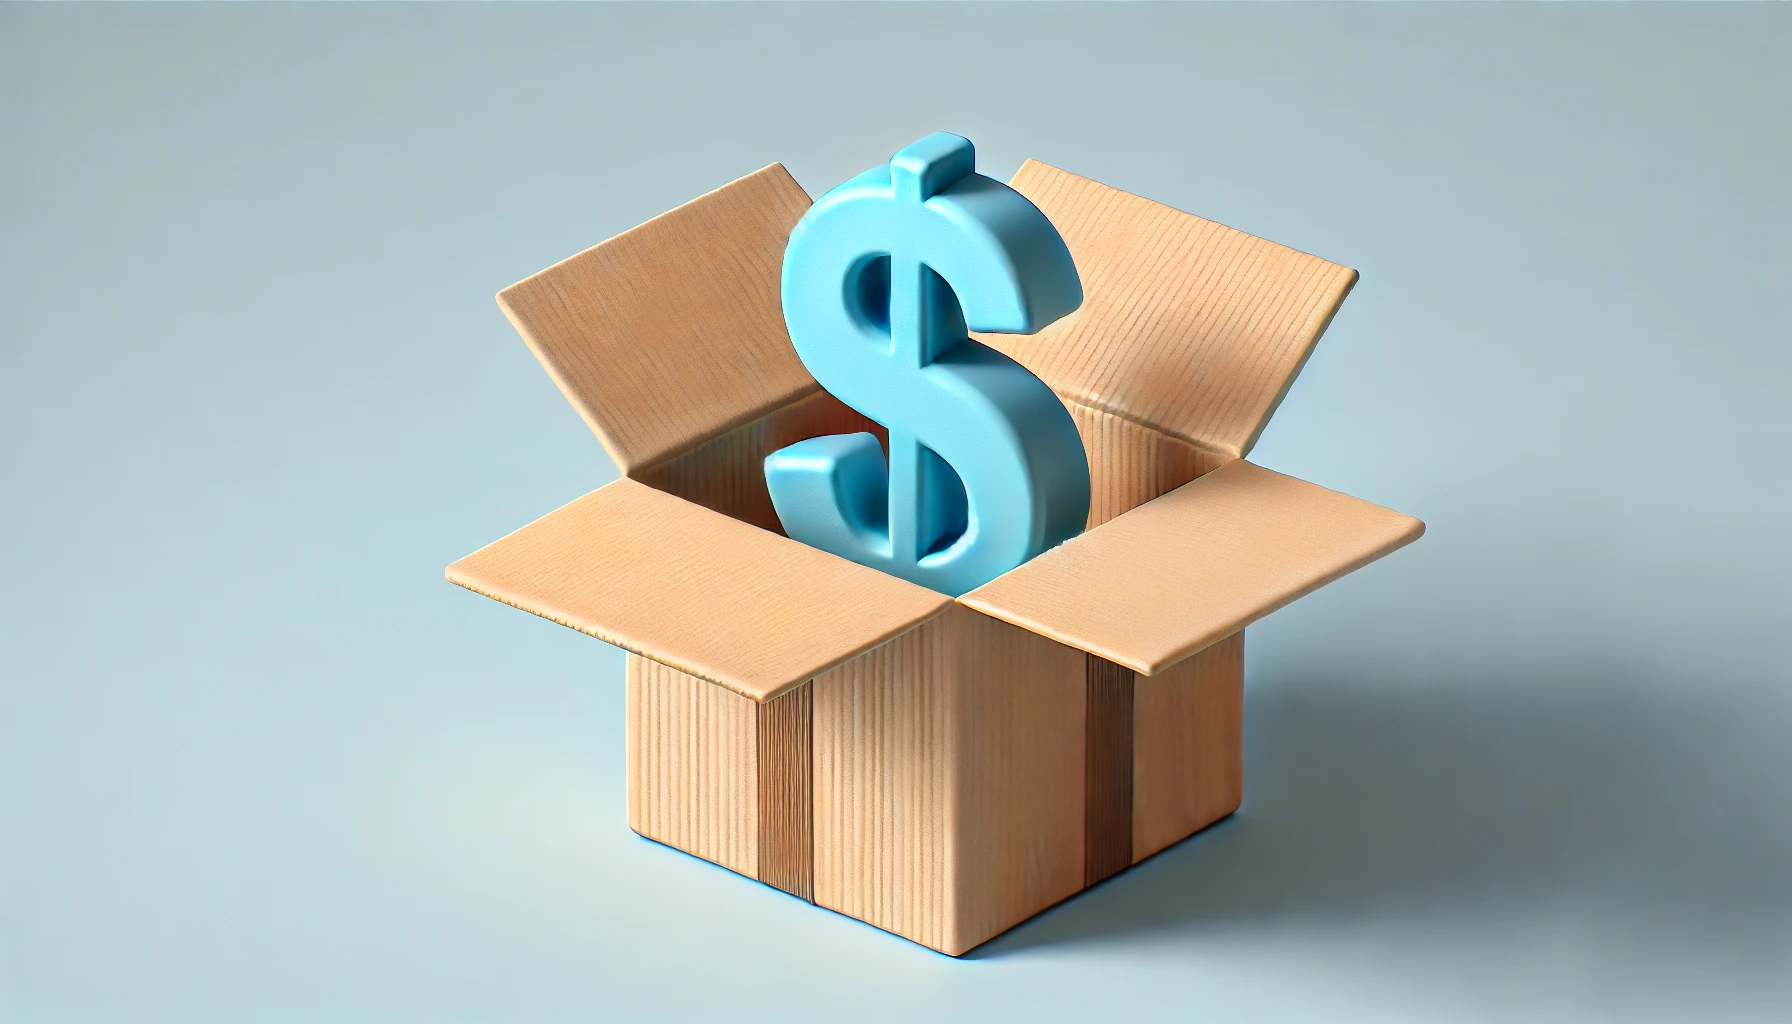 DALL·E 2024 07 17 12.58.28 A realistic 3D depiction of a light brown cardboard box opening with a small, simple blue dollar sign emerging from it. The dollar sign should have sm